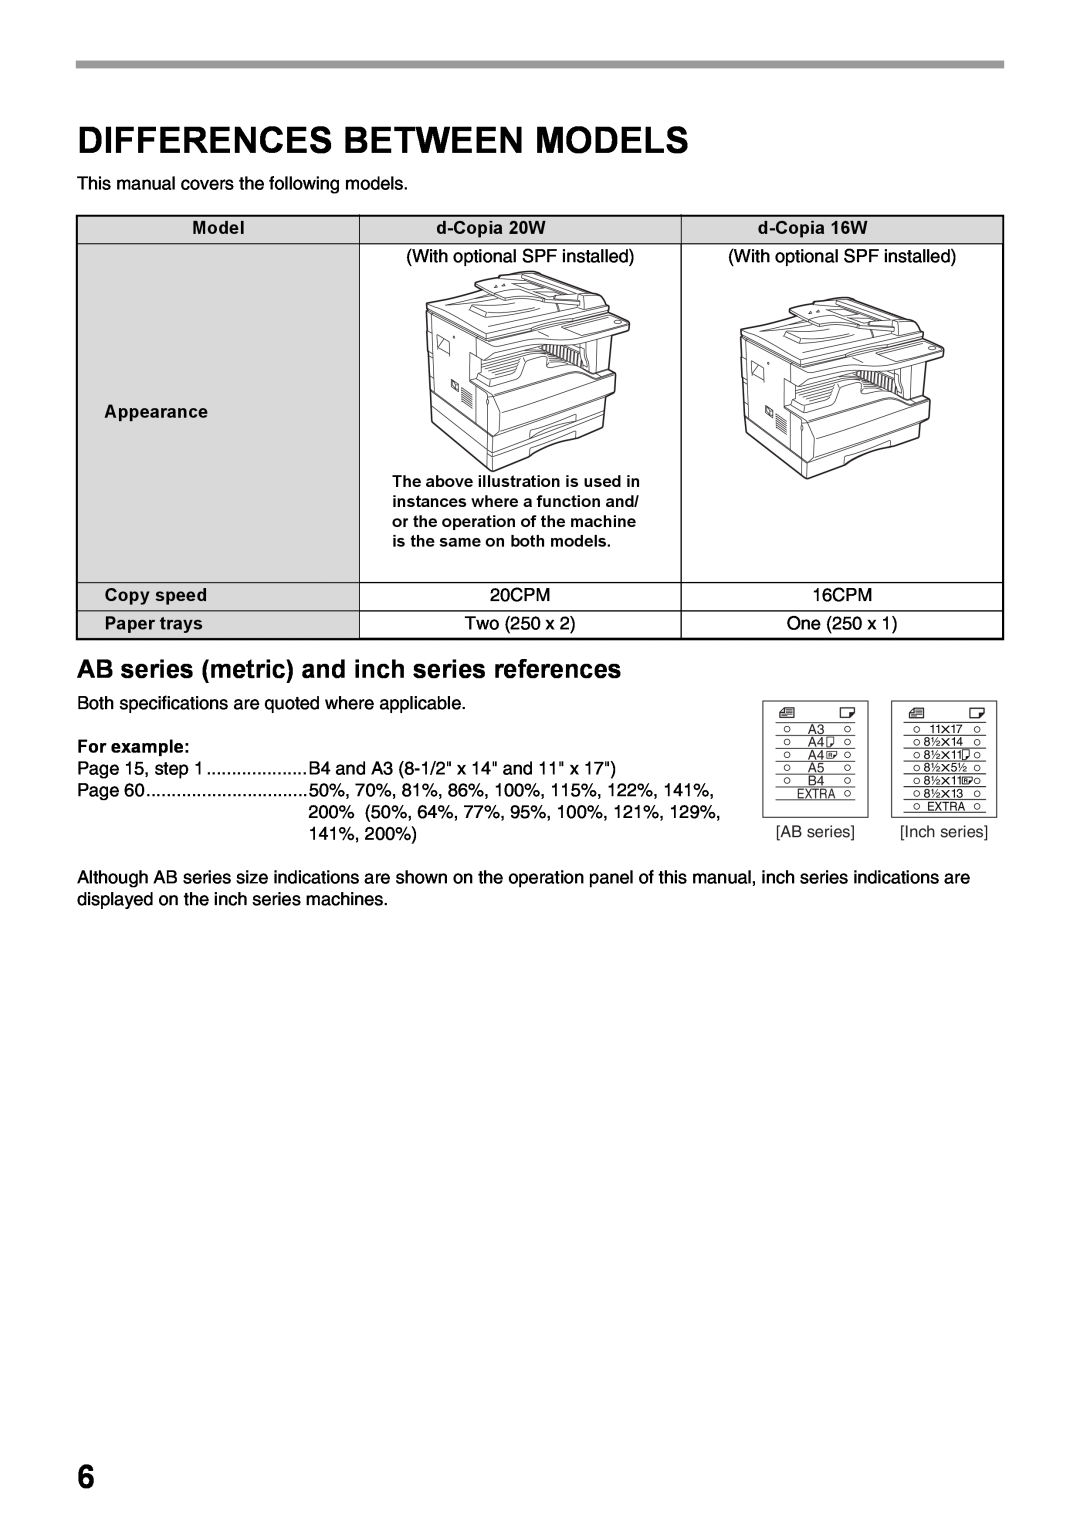 Olivetti 16W, 20W operation manual Differences Between Models, AB series metric and inch series references 